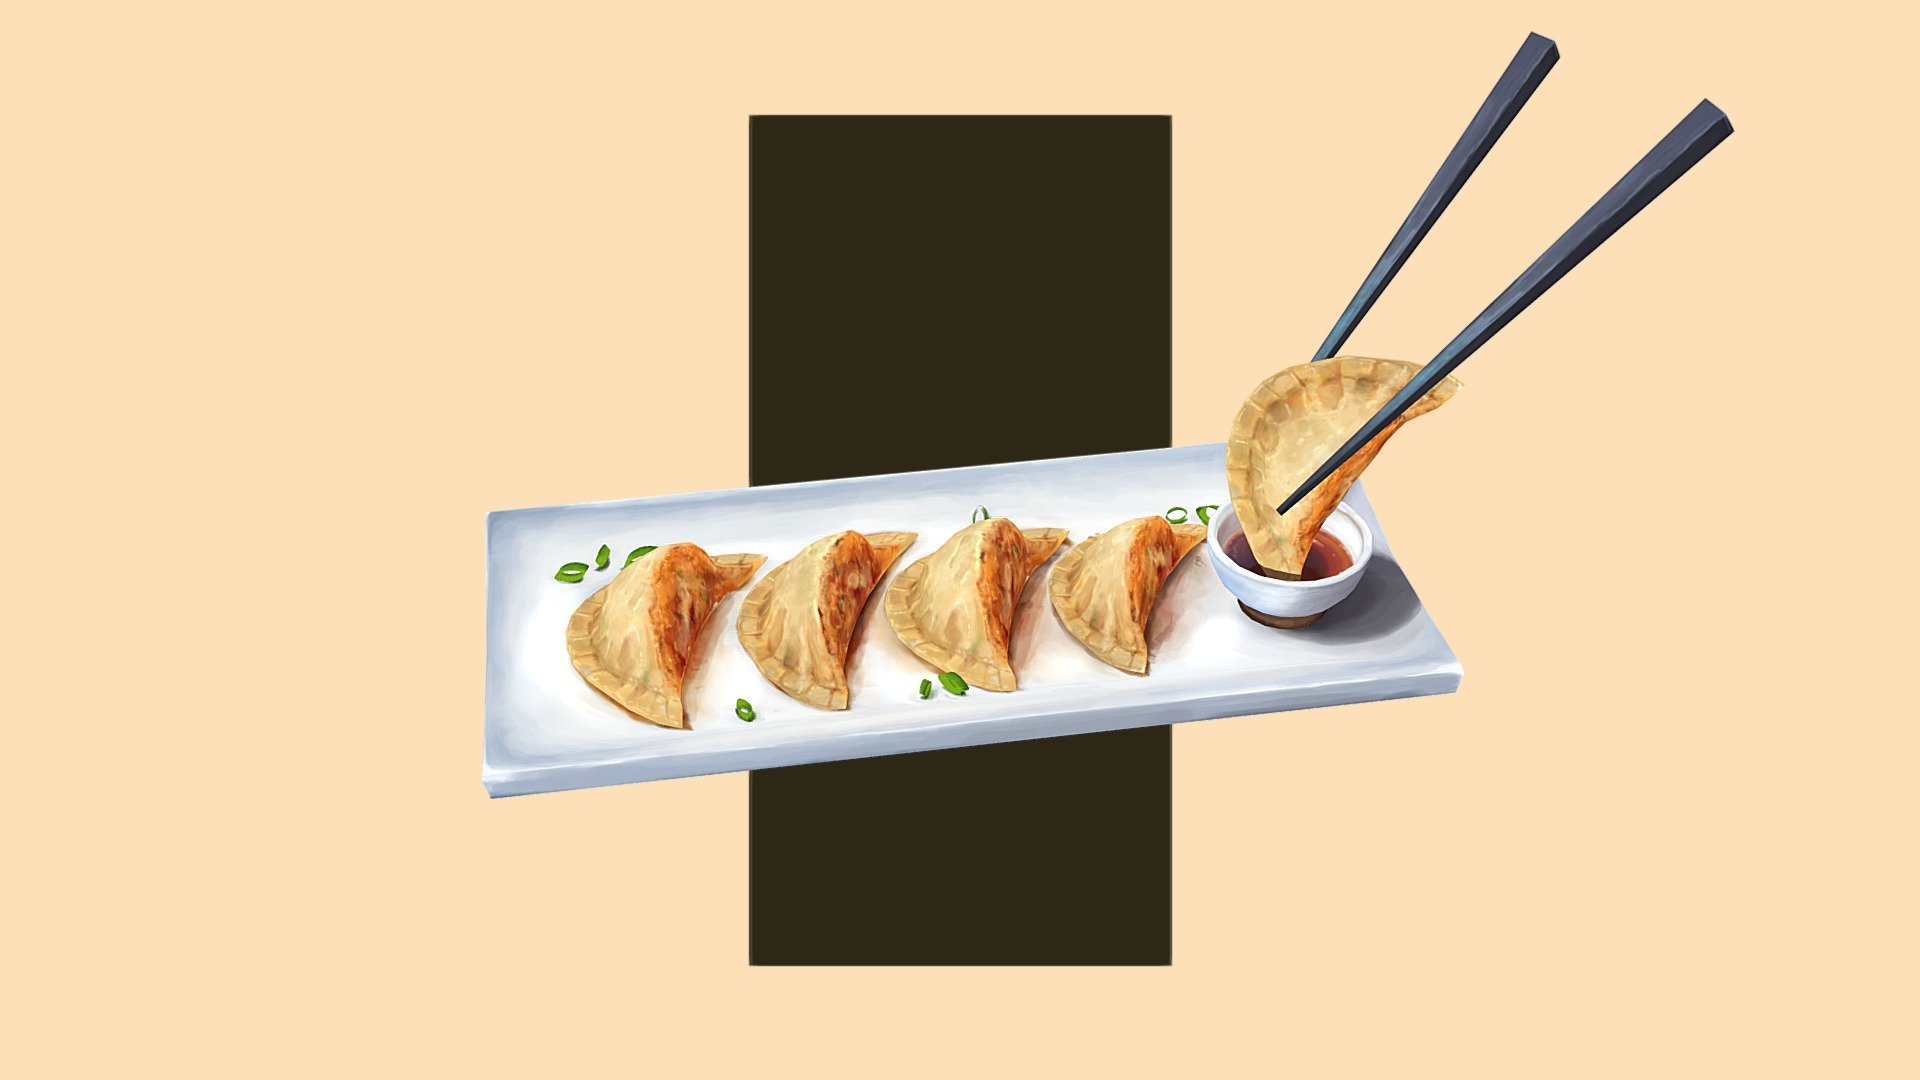 Another food study that I started a while ago but never got around finishing it. I really love Gyoza and could eat a ton of them! These were quite challenging but I learned a lot + it was super fun to draw one of my favourite japanese foods. 
All Diffuse handpainted 3d model